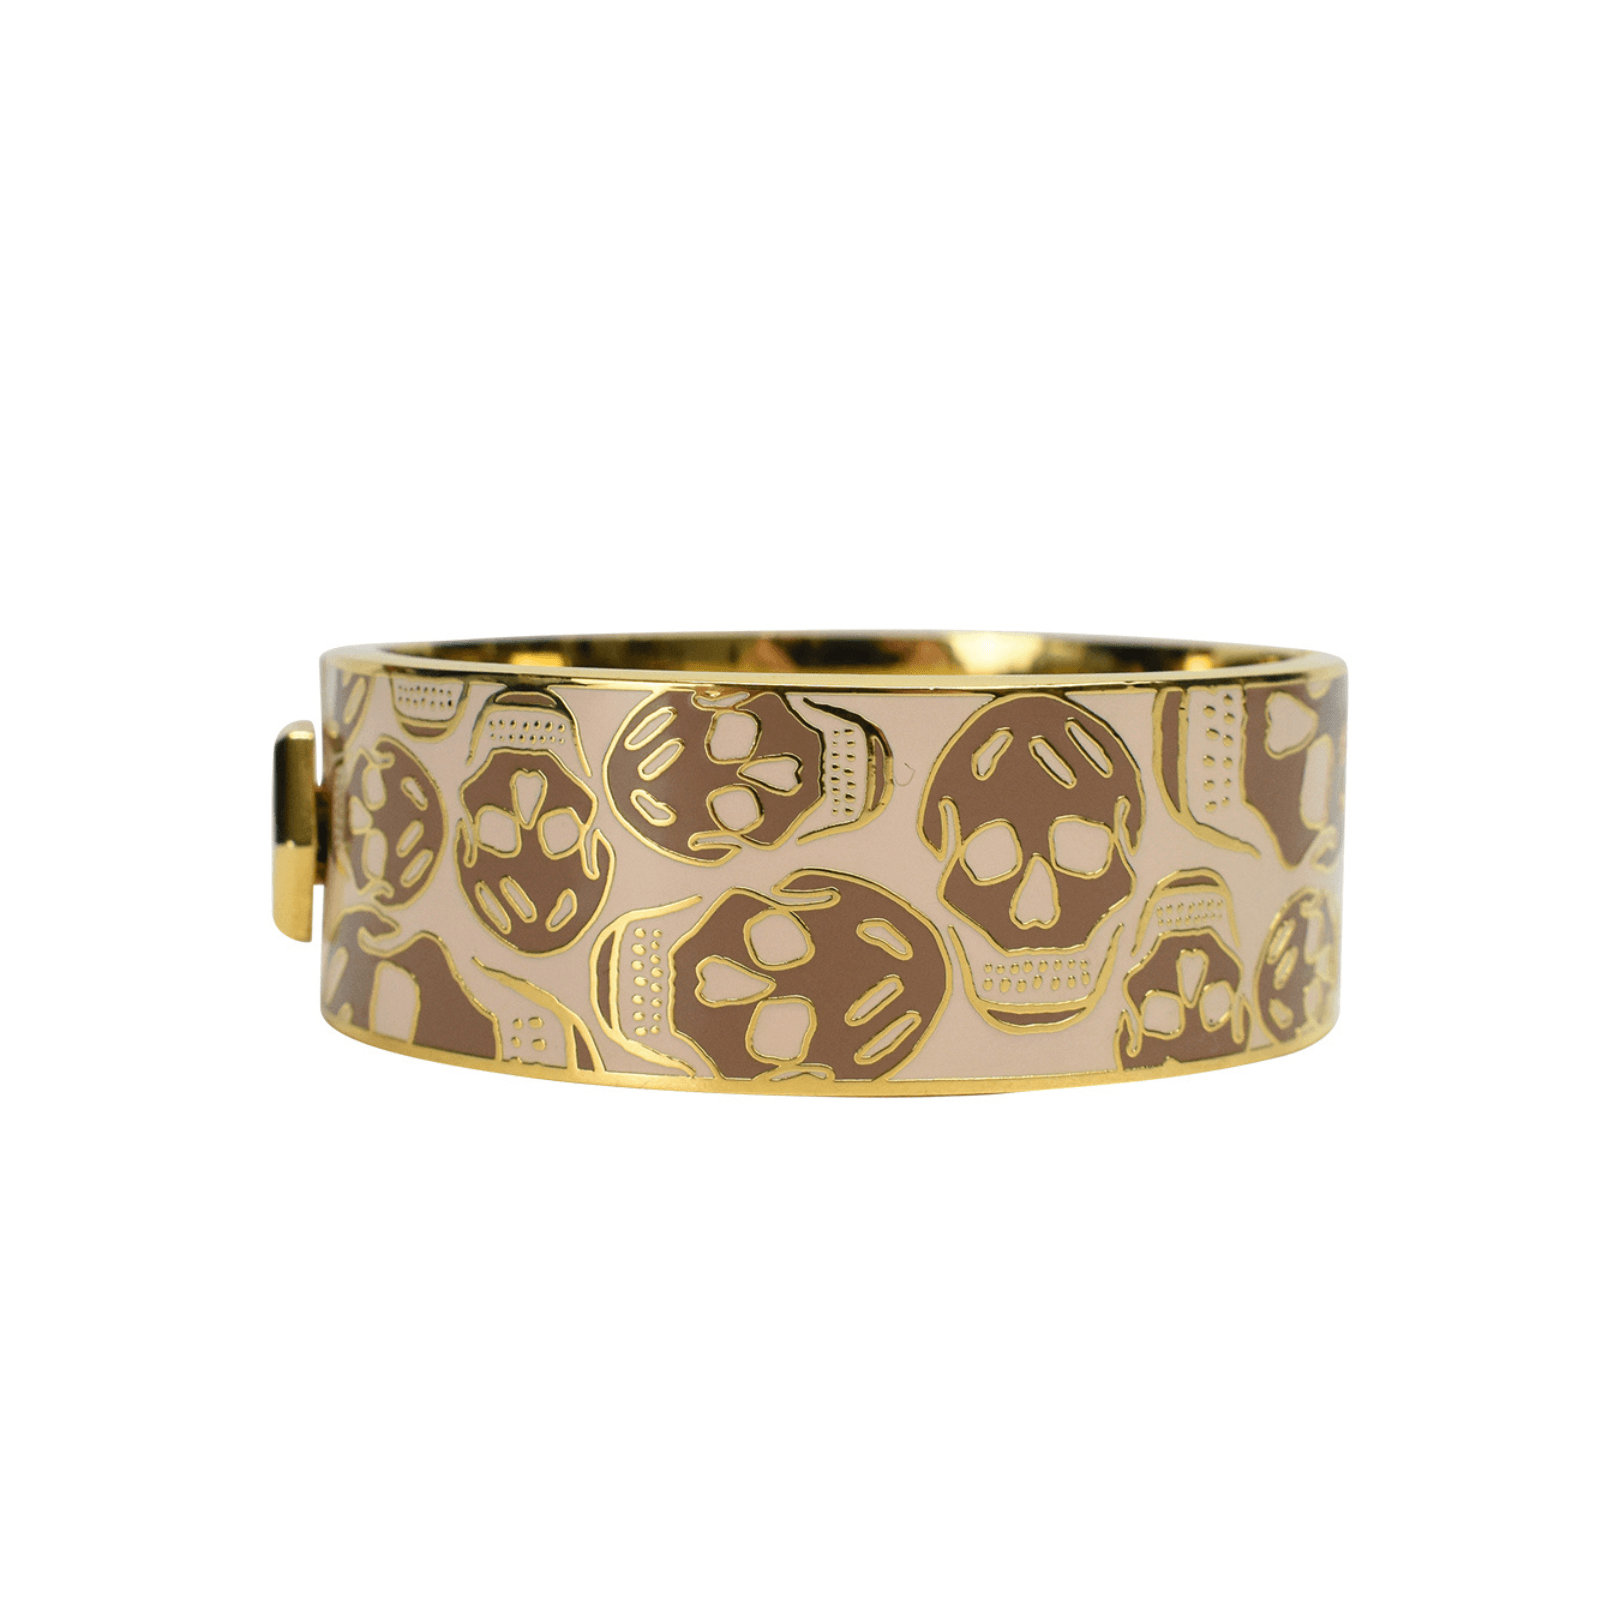 Alexander McQueen Bangle Bracelet - Fashionably Yours